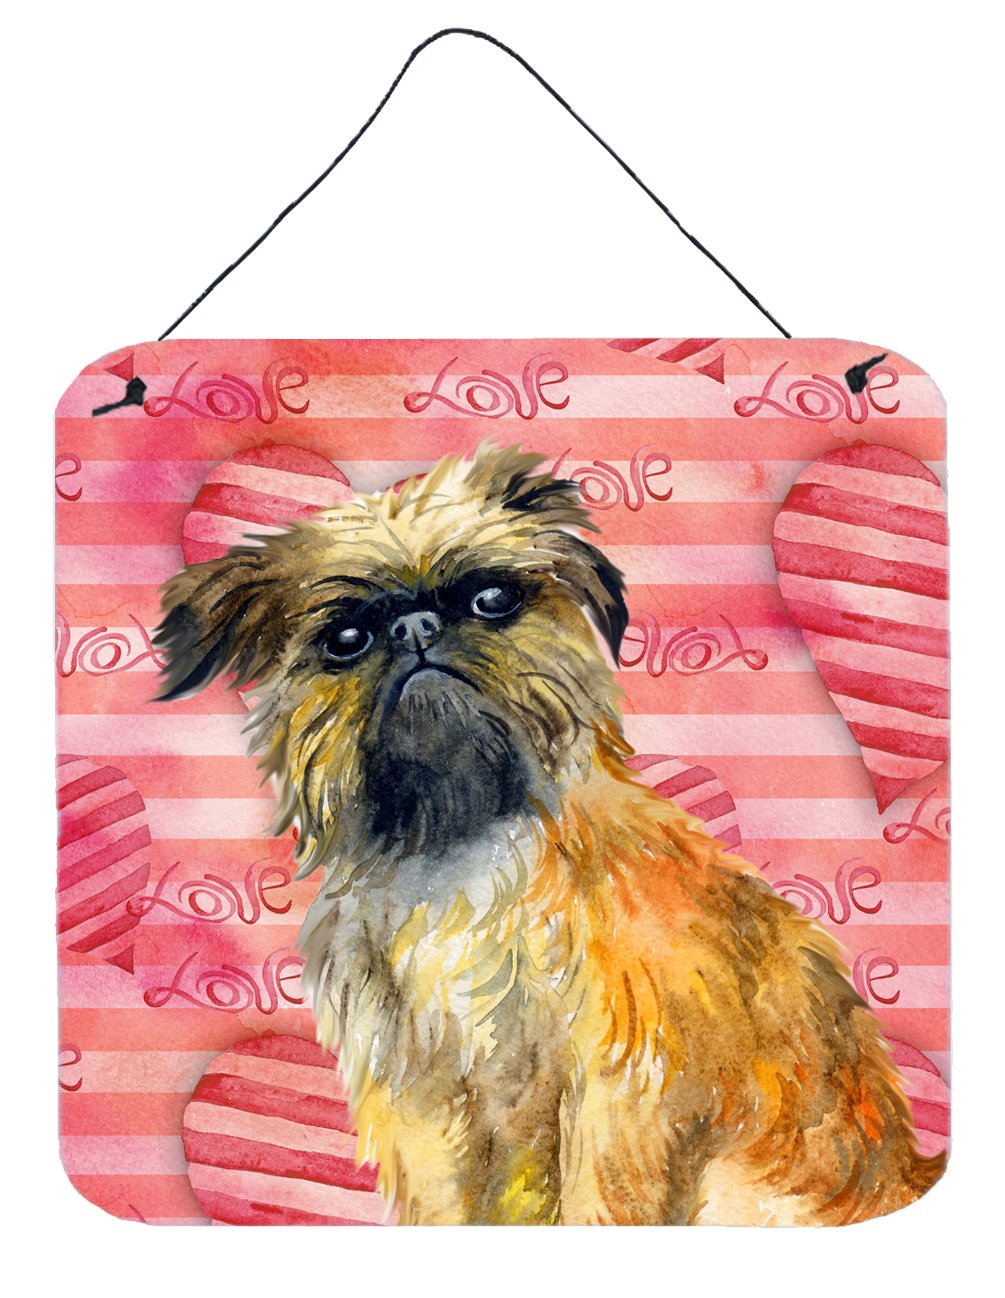 Brussels Griffon Love Wall or Door Hanging Prints BB9774DS66 by Caroline's Treasures